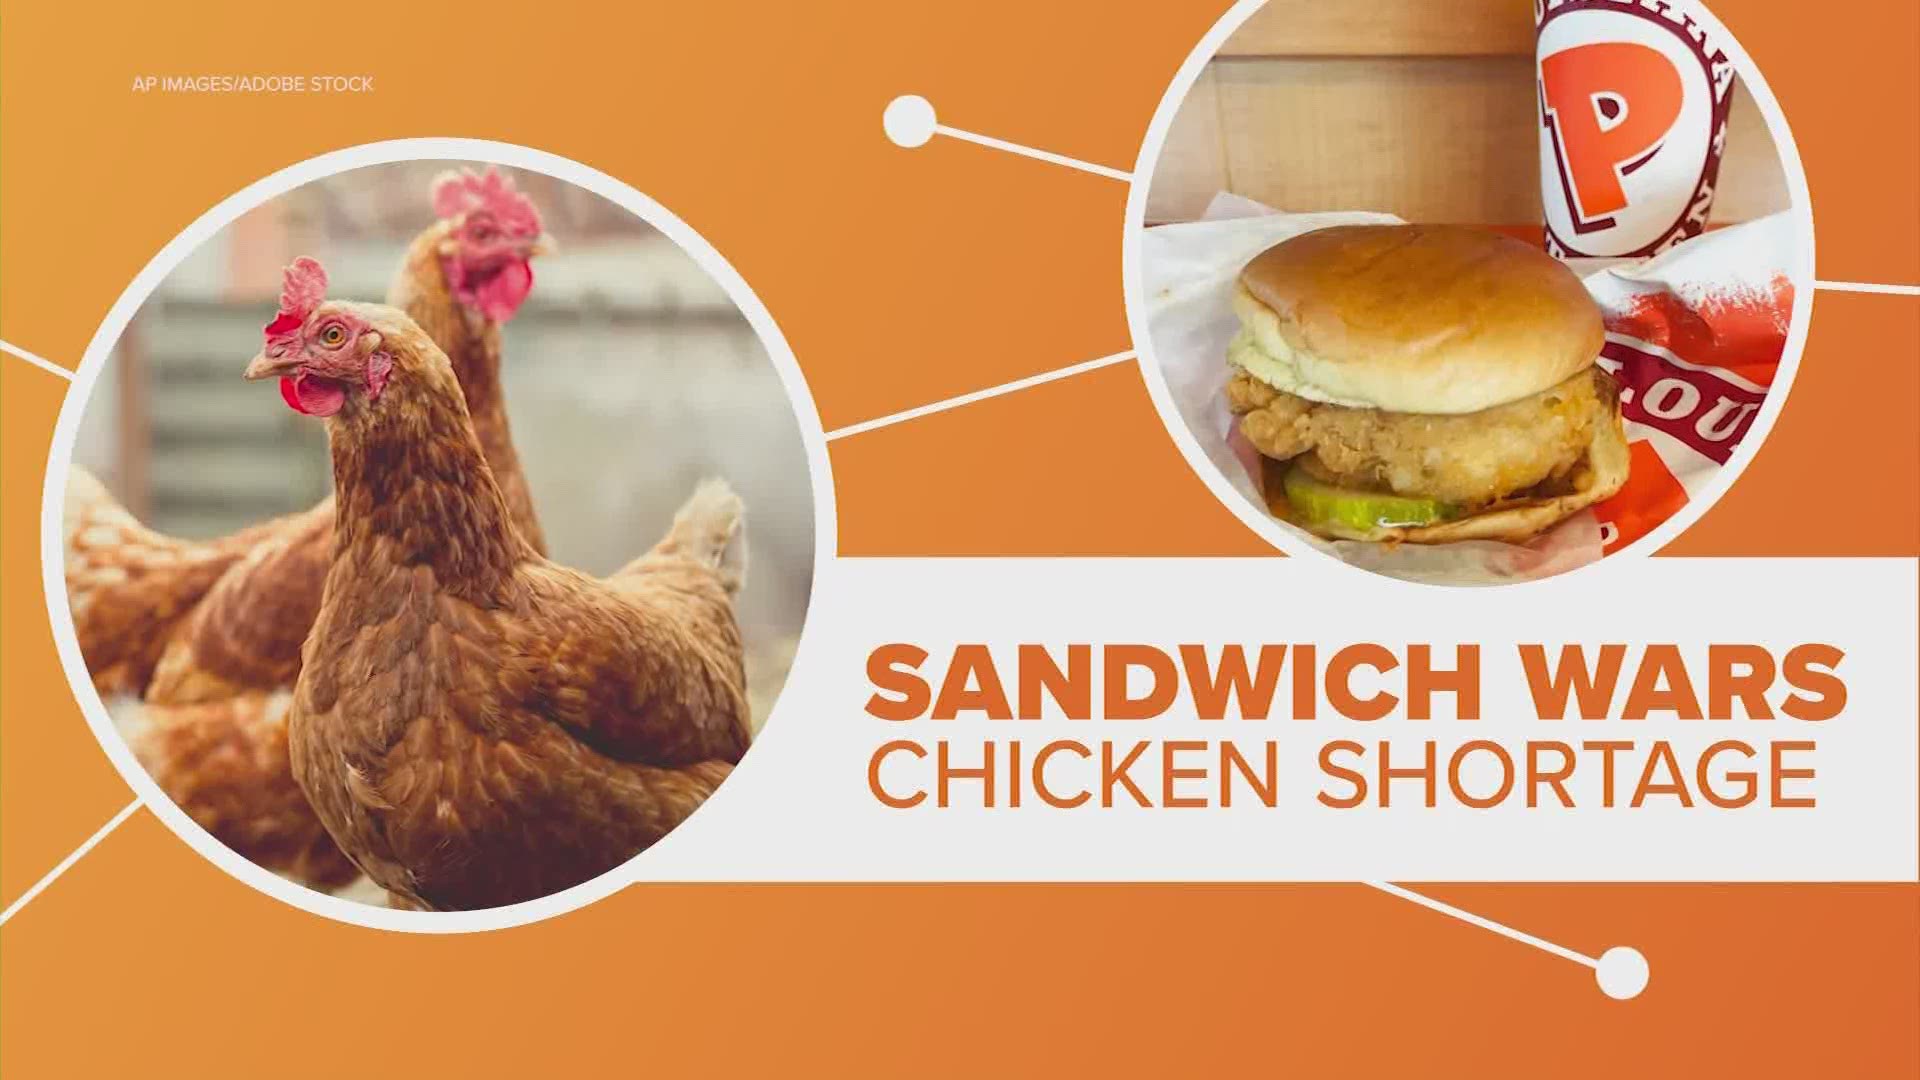 U.S. is facing a nationwide chicken shortage. It's spurred by a lot of factors including the recent Winter Storm, the pandemic and the Chicken Sandwich wars.